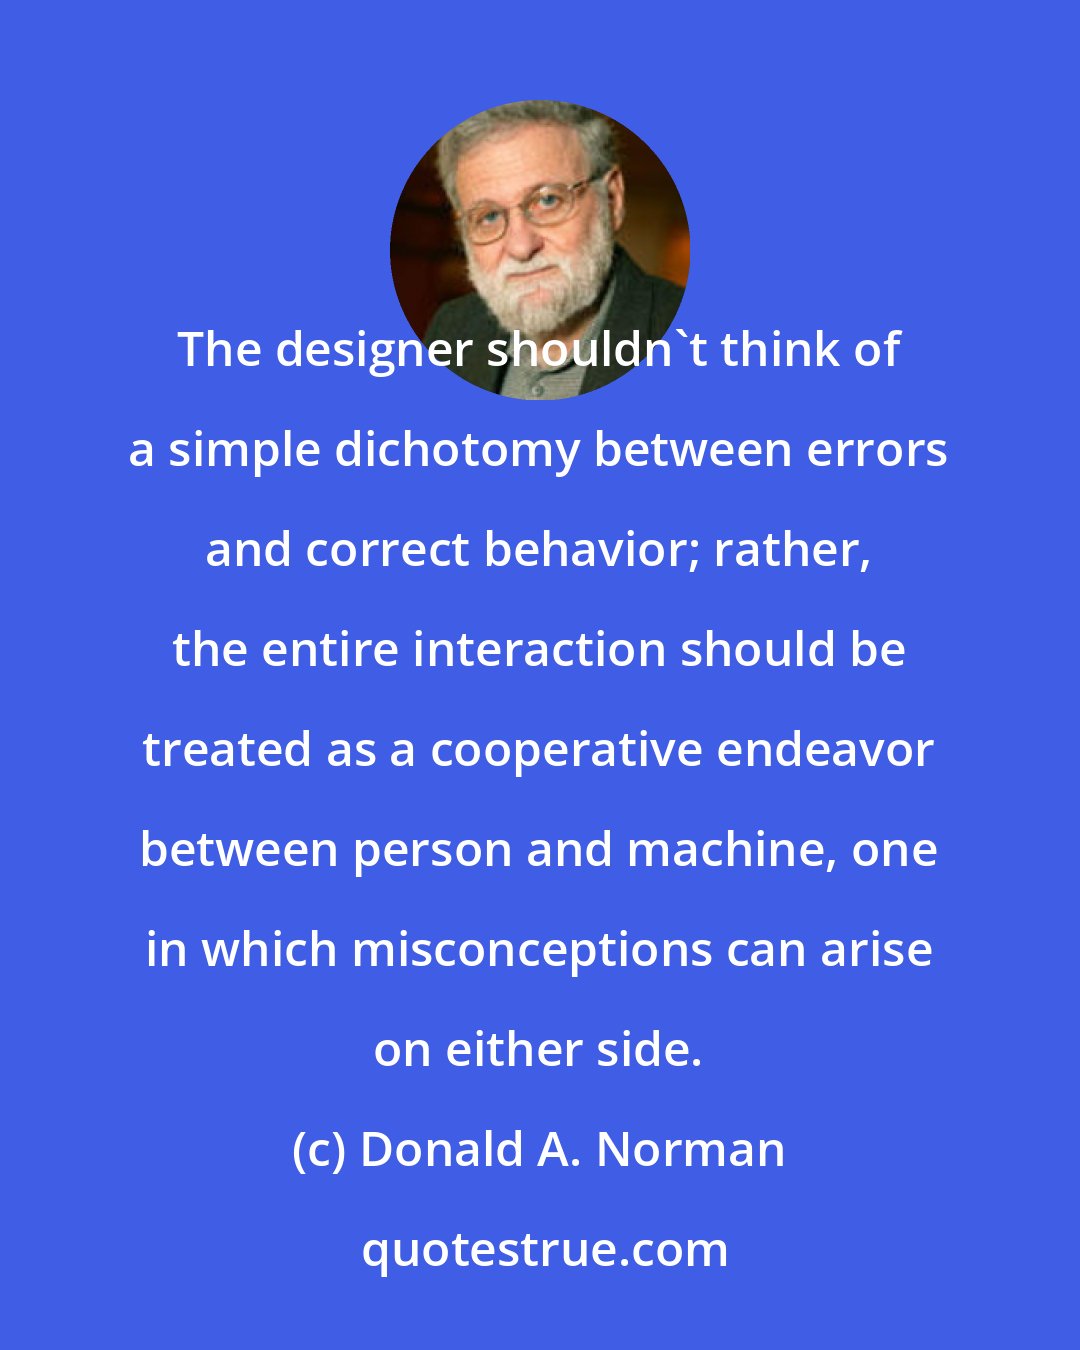 Donald A. Norman: The designer shouldn't think of a simple dichotomy between errors and correct behavior; rather, the entire interaction should be treated as a cooperative endeavor between person and machine, one in which misconceptions can arise on either side.